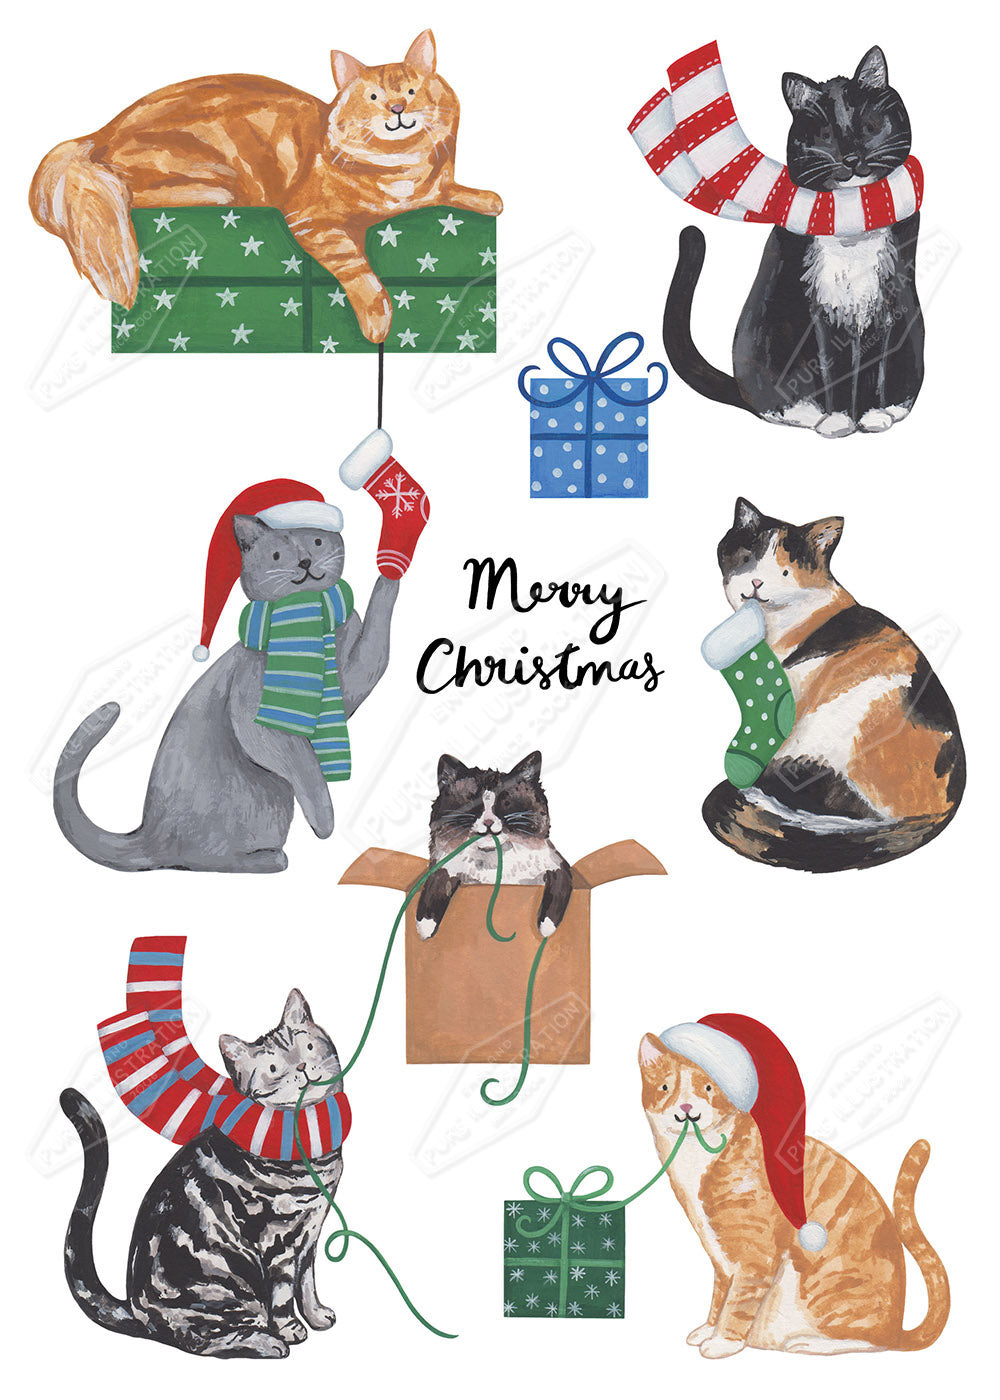 00034185AAI - Christmas Cats design - Pure Art Licensing Agency